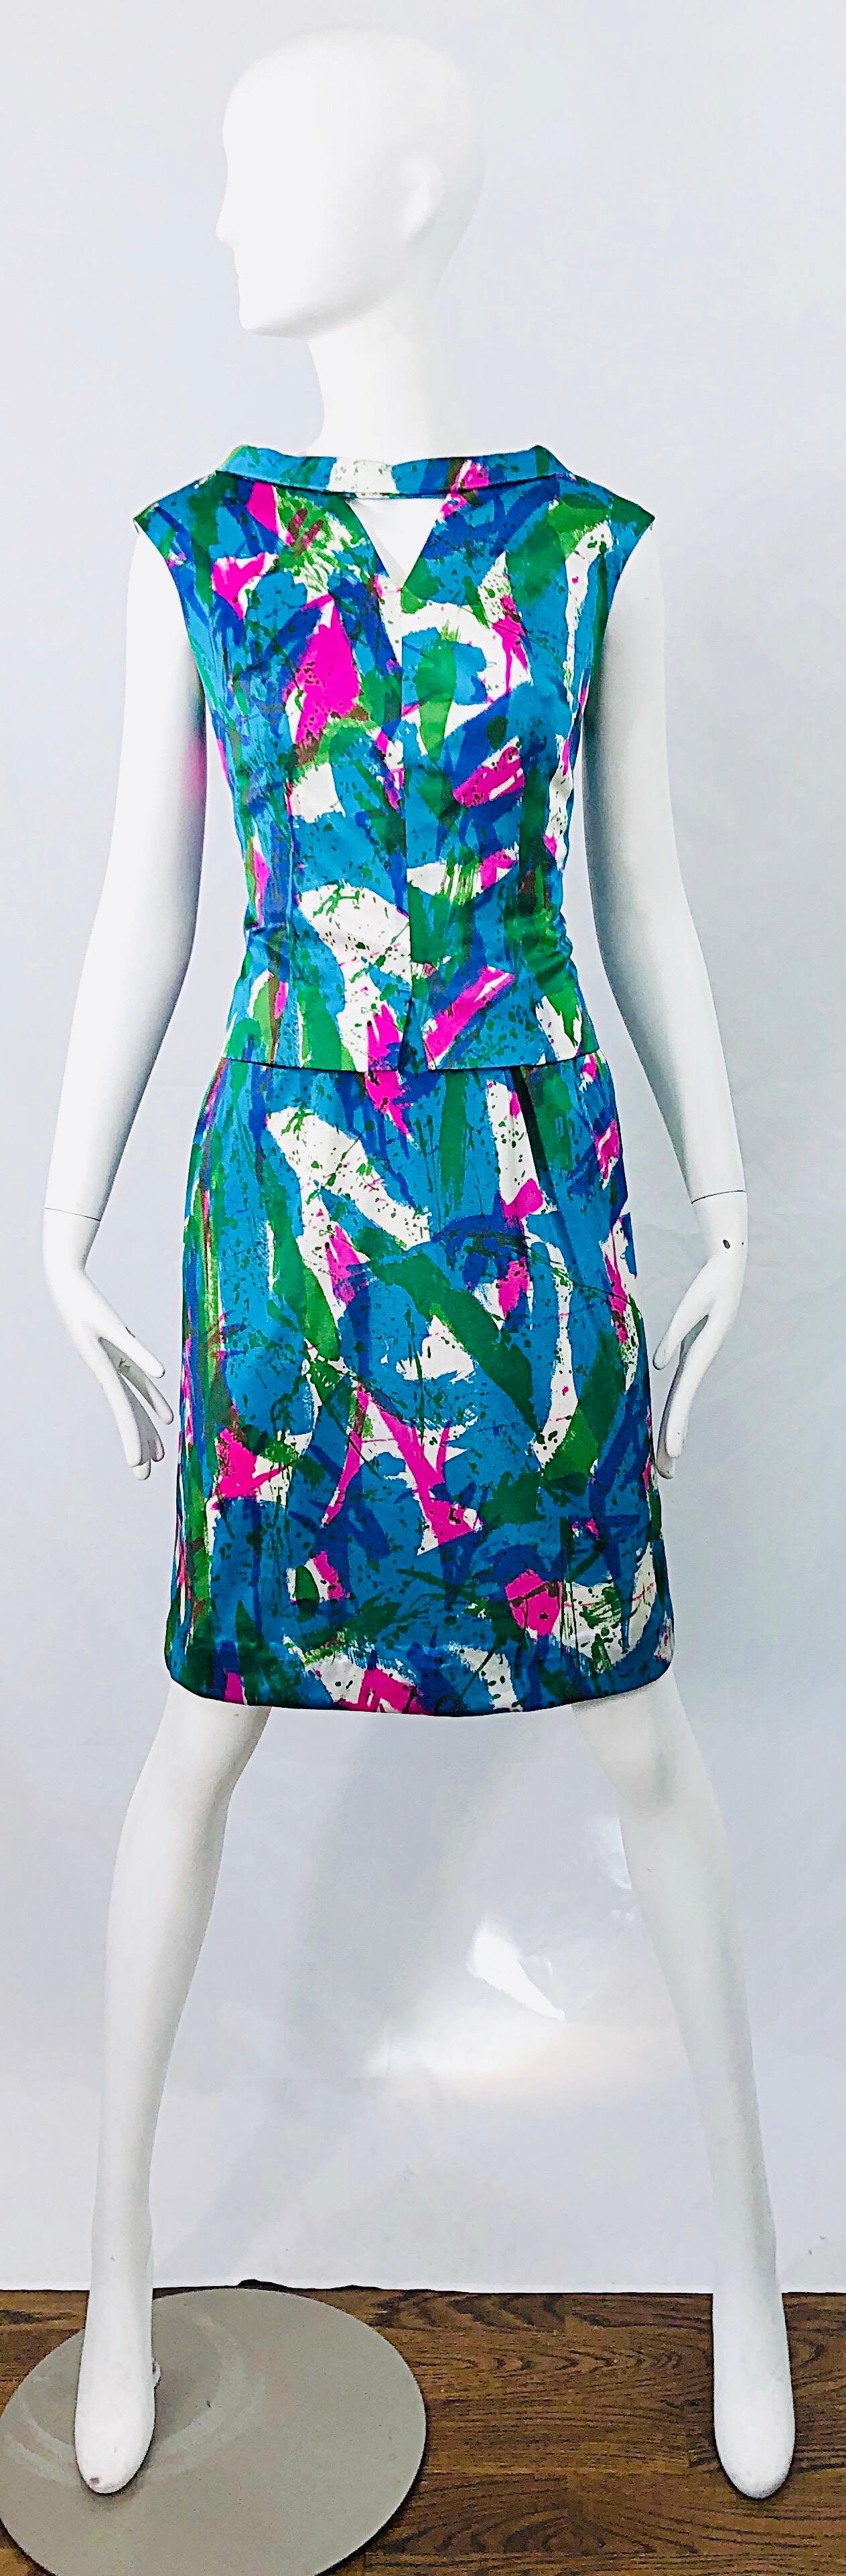 Chic mid 60s vibrant colored abstract print two piece sheath dress and top ! Features vibrant neon colors of pink, blue, turquoise, green and white throughout. Top features center cut-out at top center neck. Dress has a tailored bodice with nipped